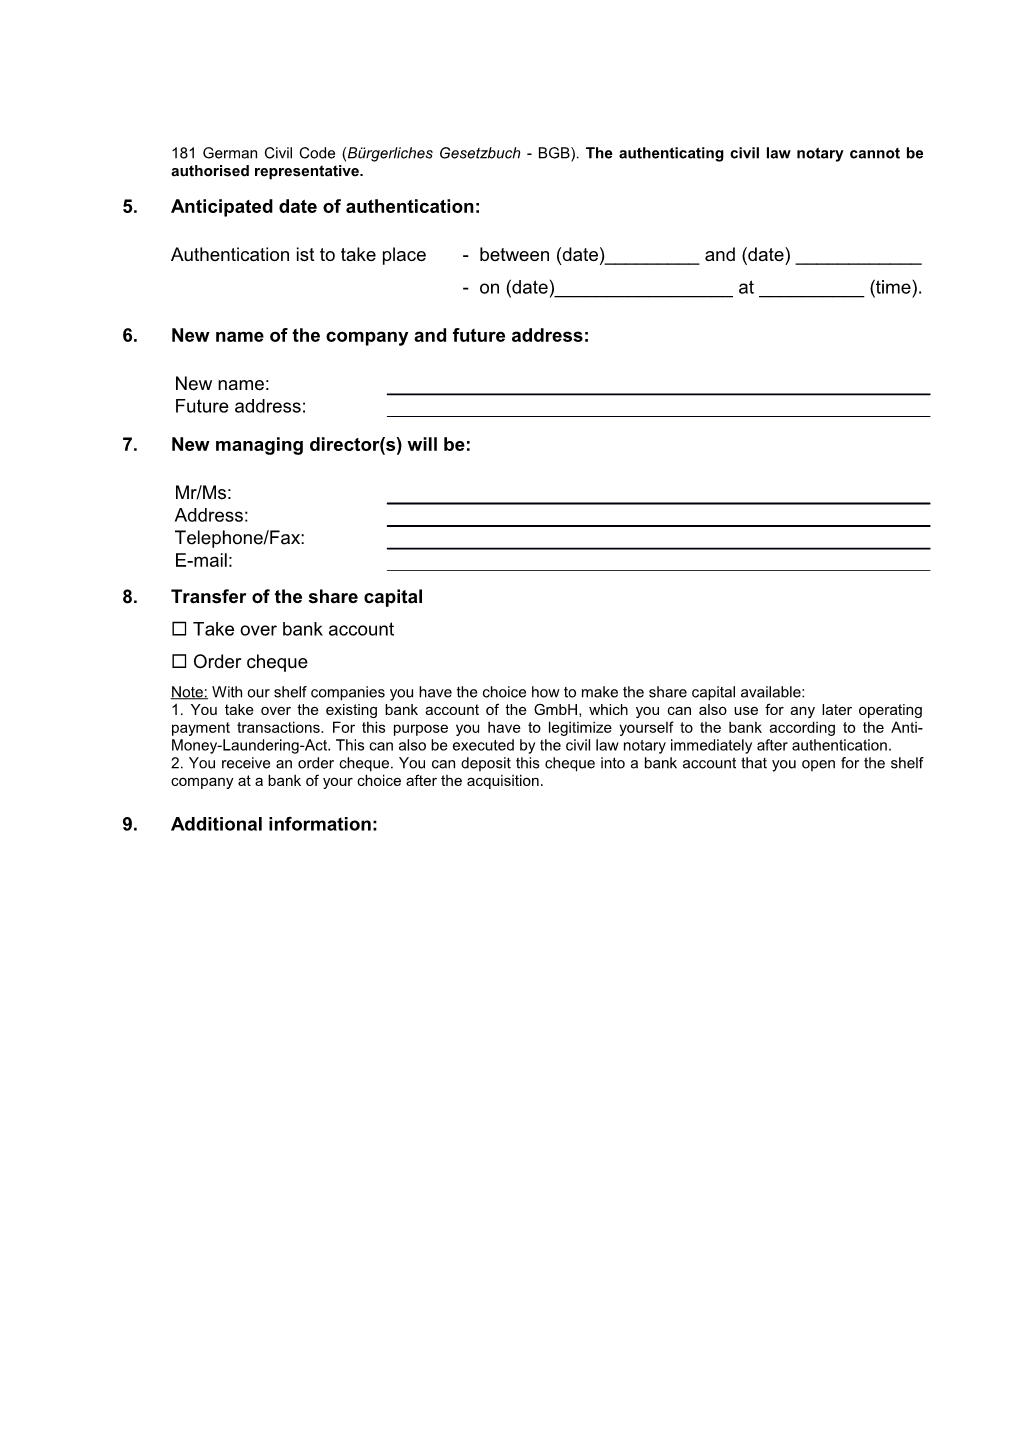 Preparation Form (Gmbh) Dated